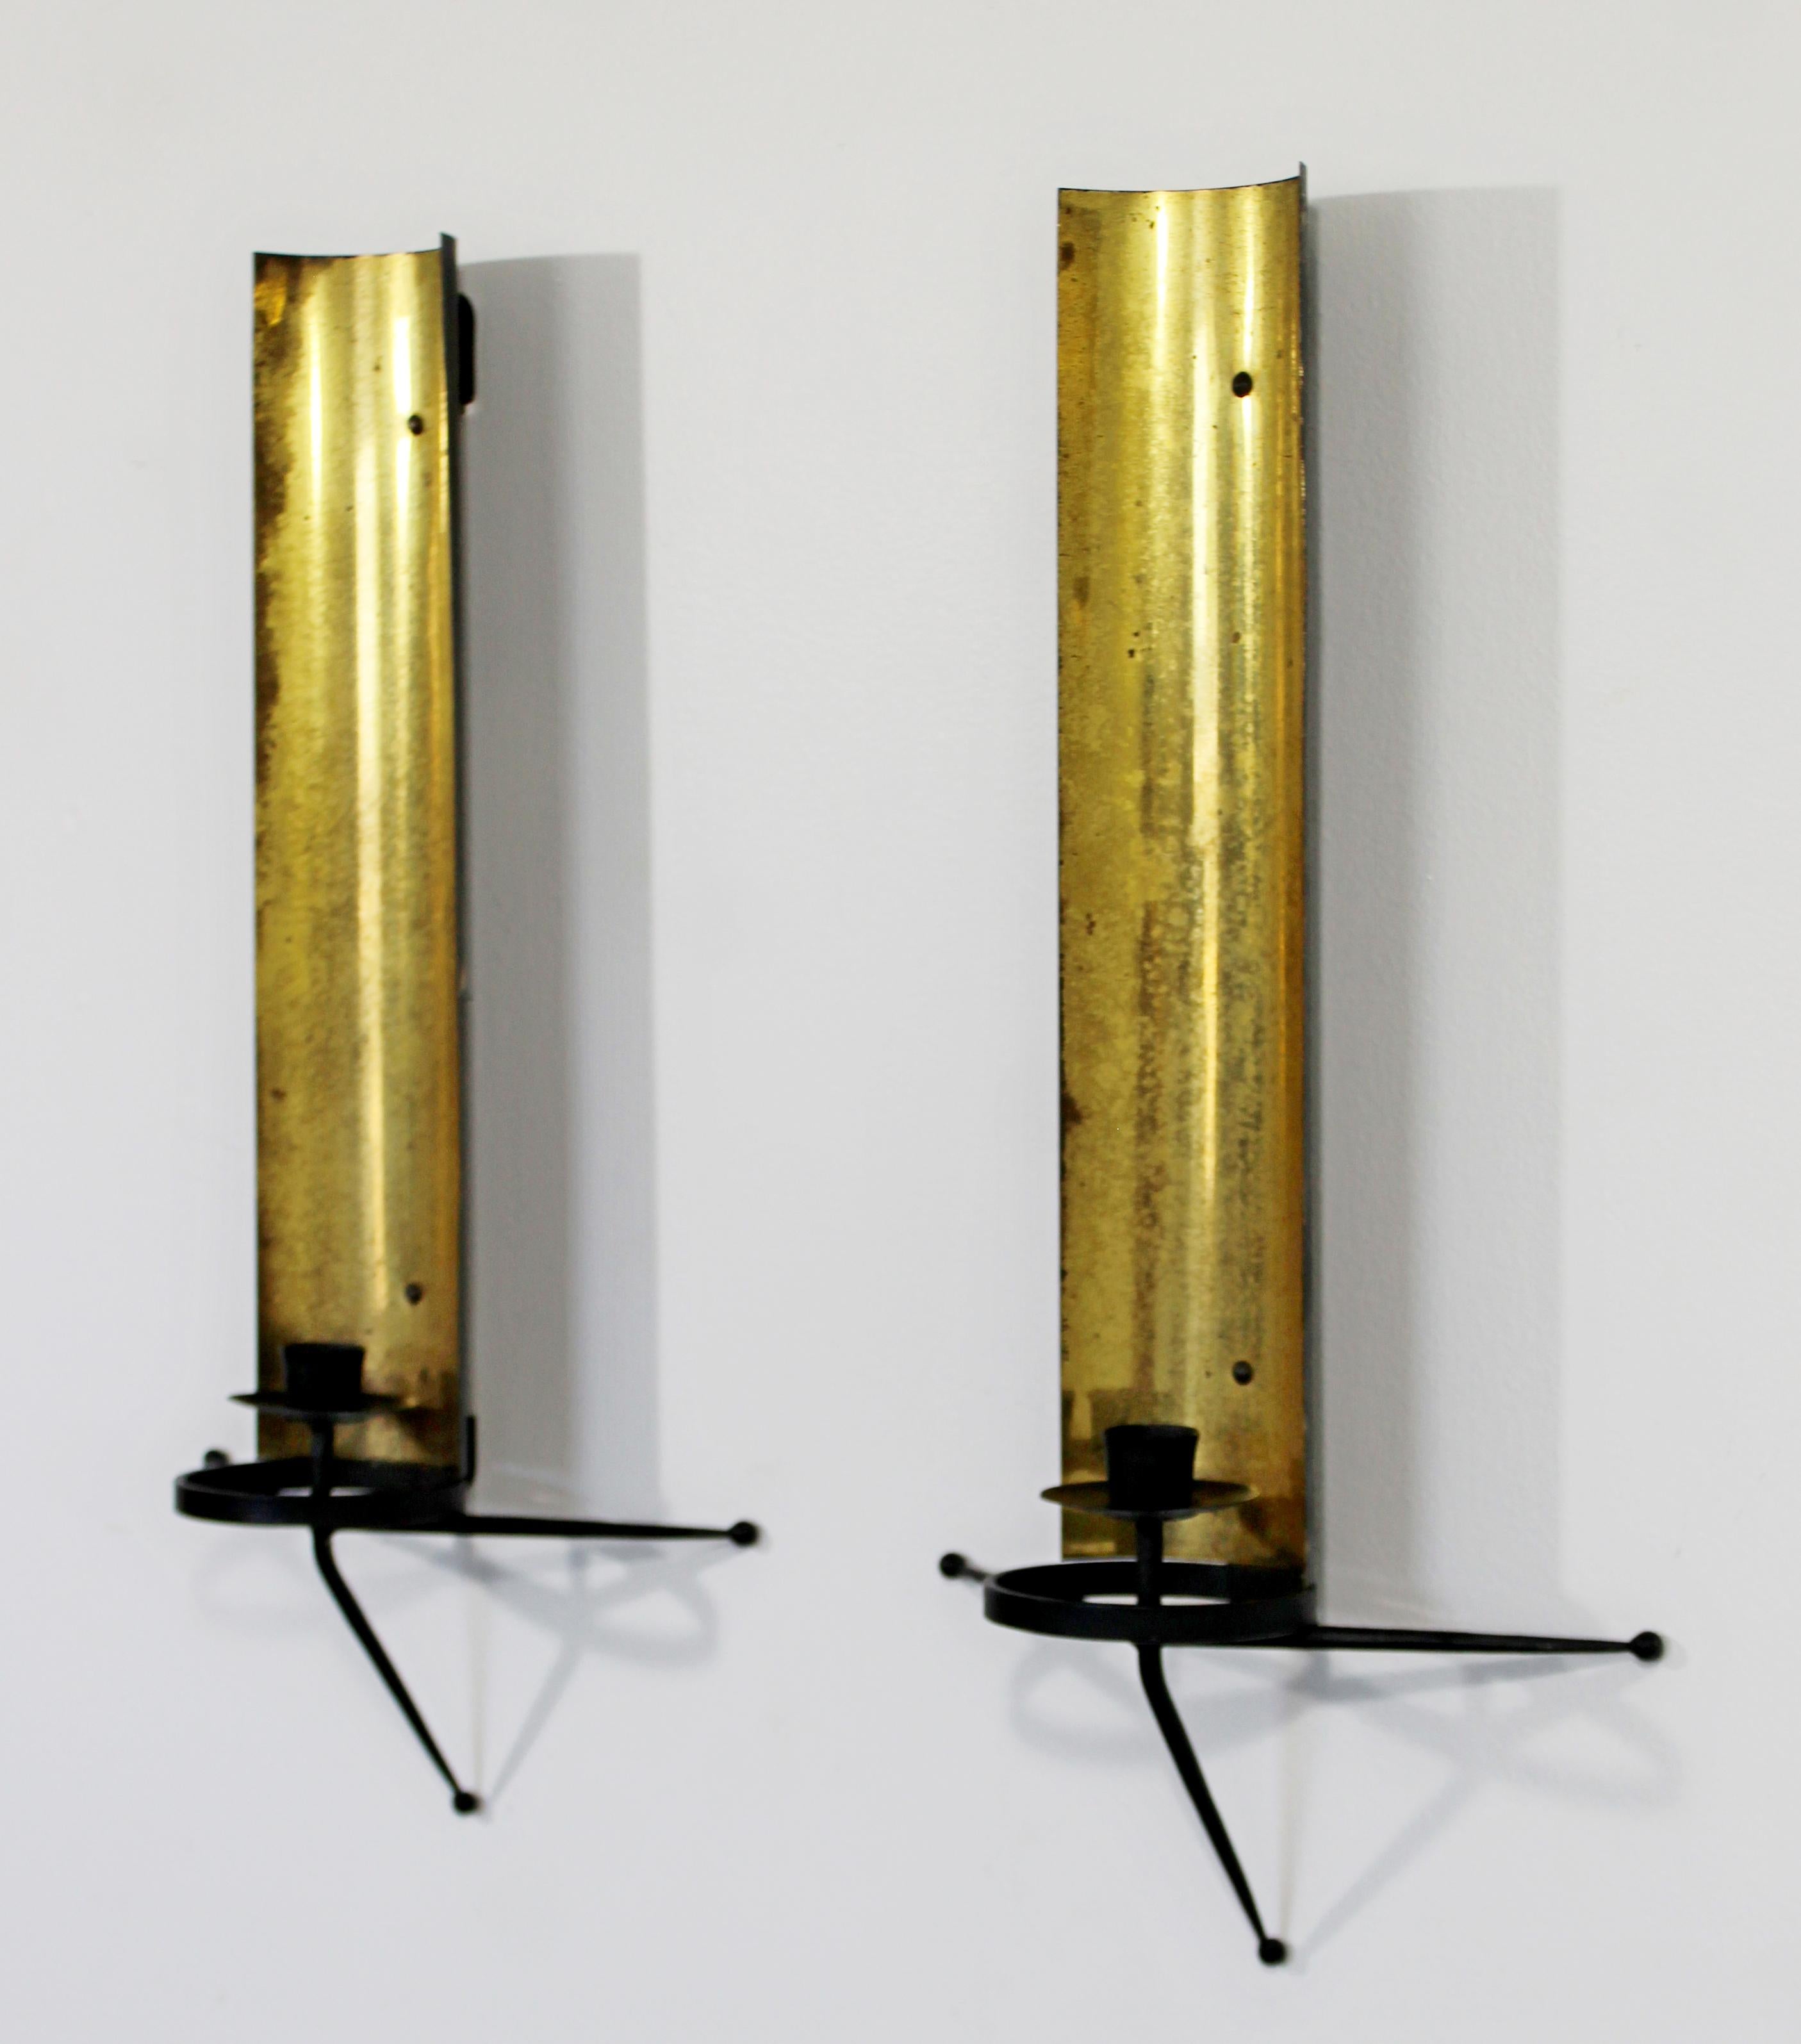 For your consideration is an incredible pair of brass and black metal wall sconces, by Tony Paul, circa 1950s. In very good vintage condition. The dimensions of each are 9